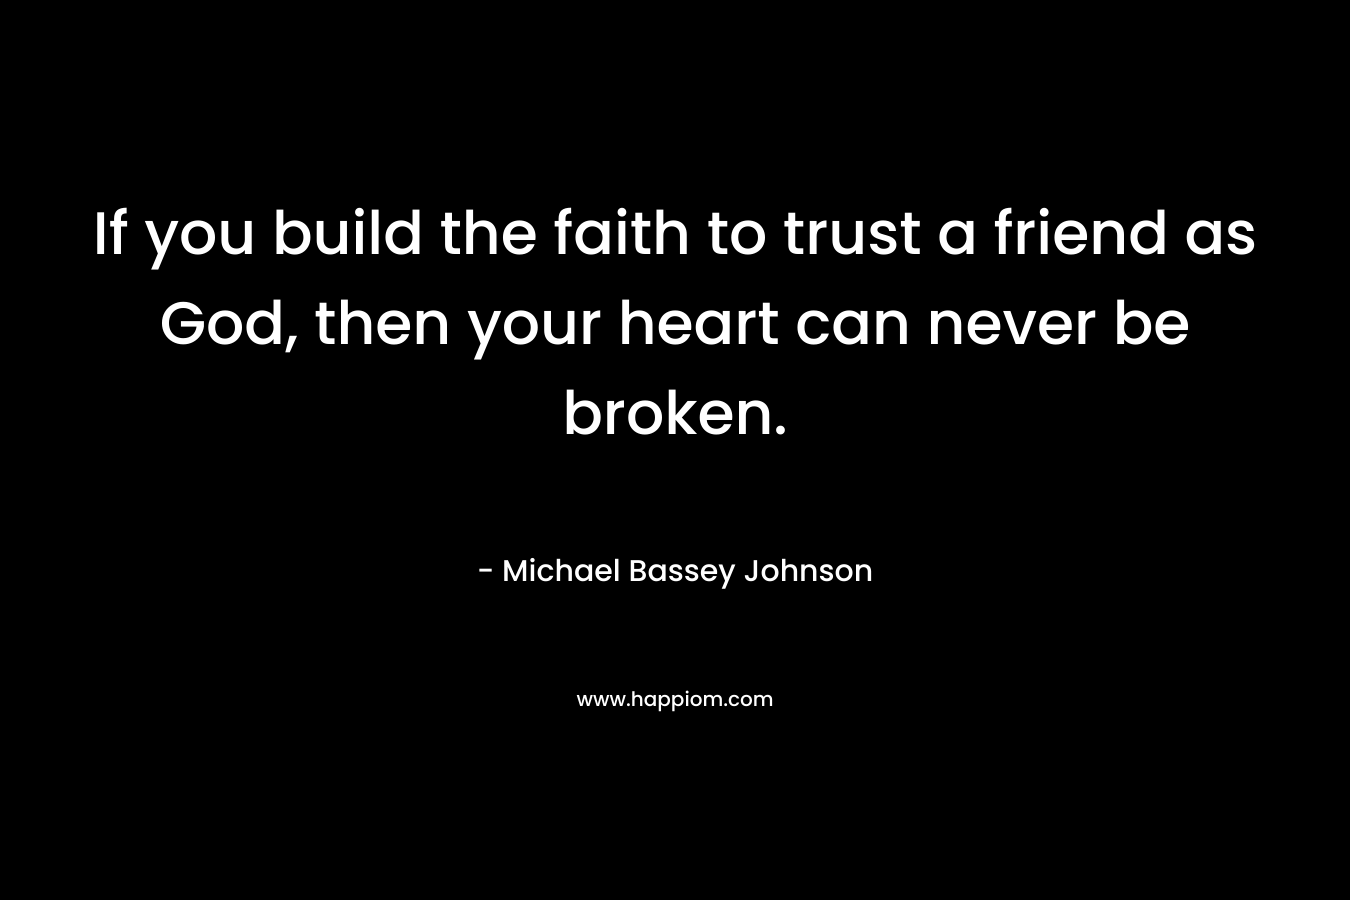 If you build the faith to trust a friend as God, then your heart can never be broken.